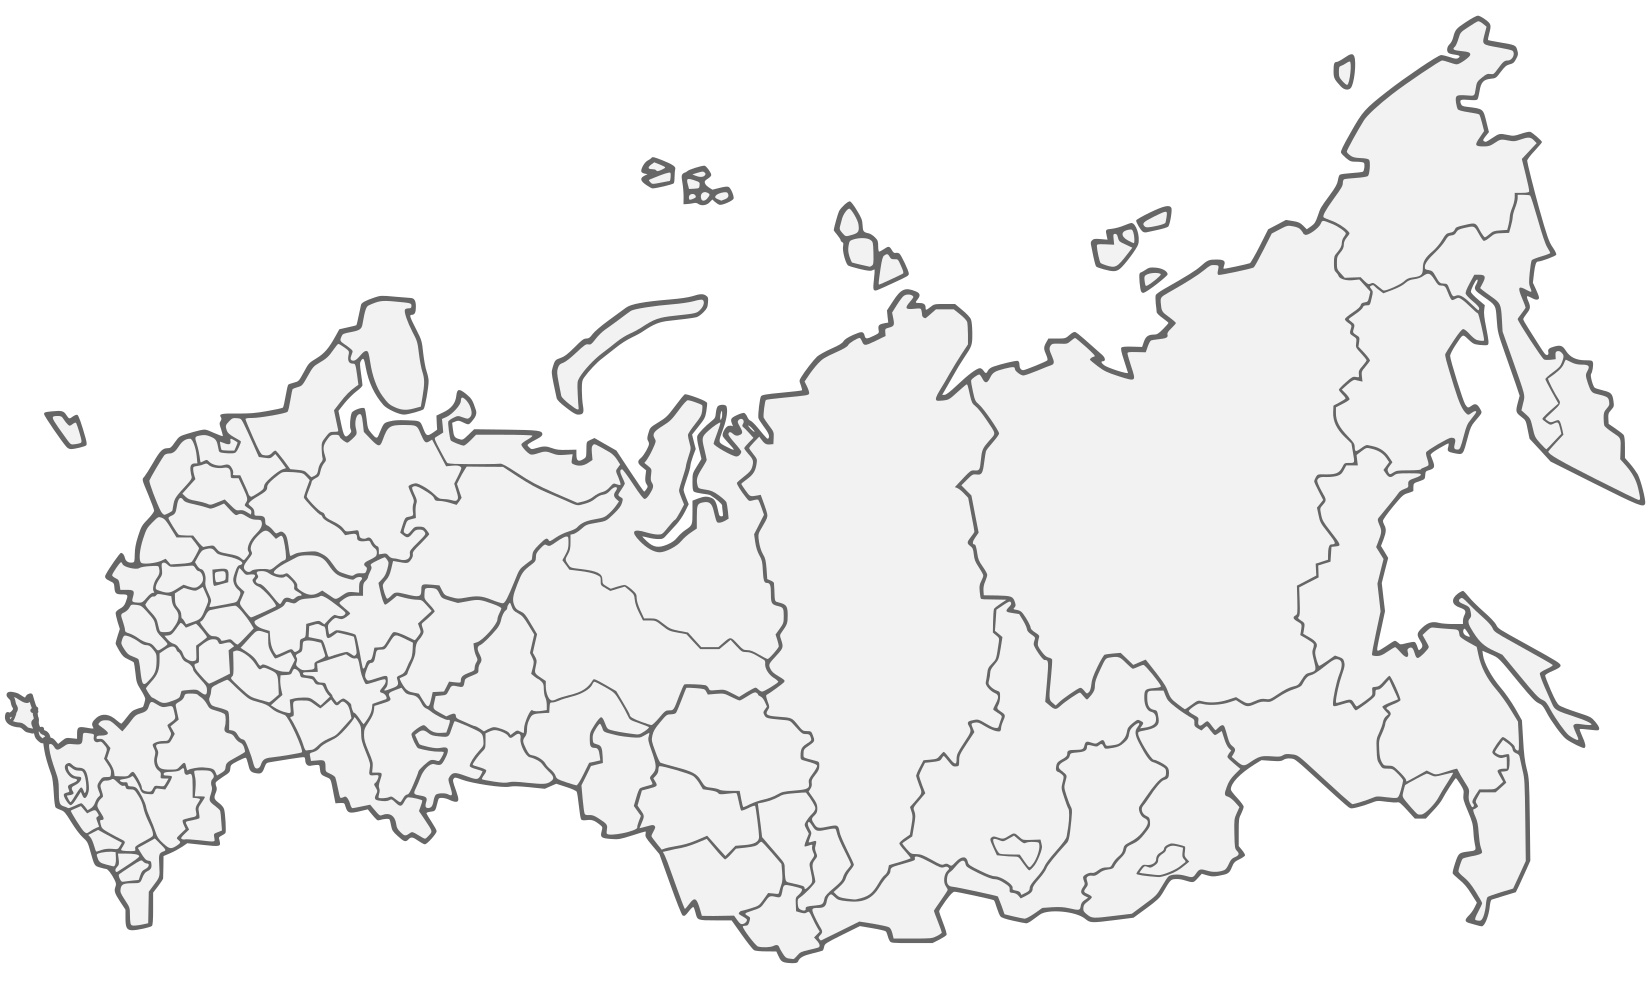 map of russia